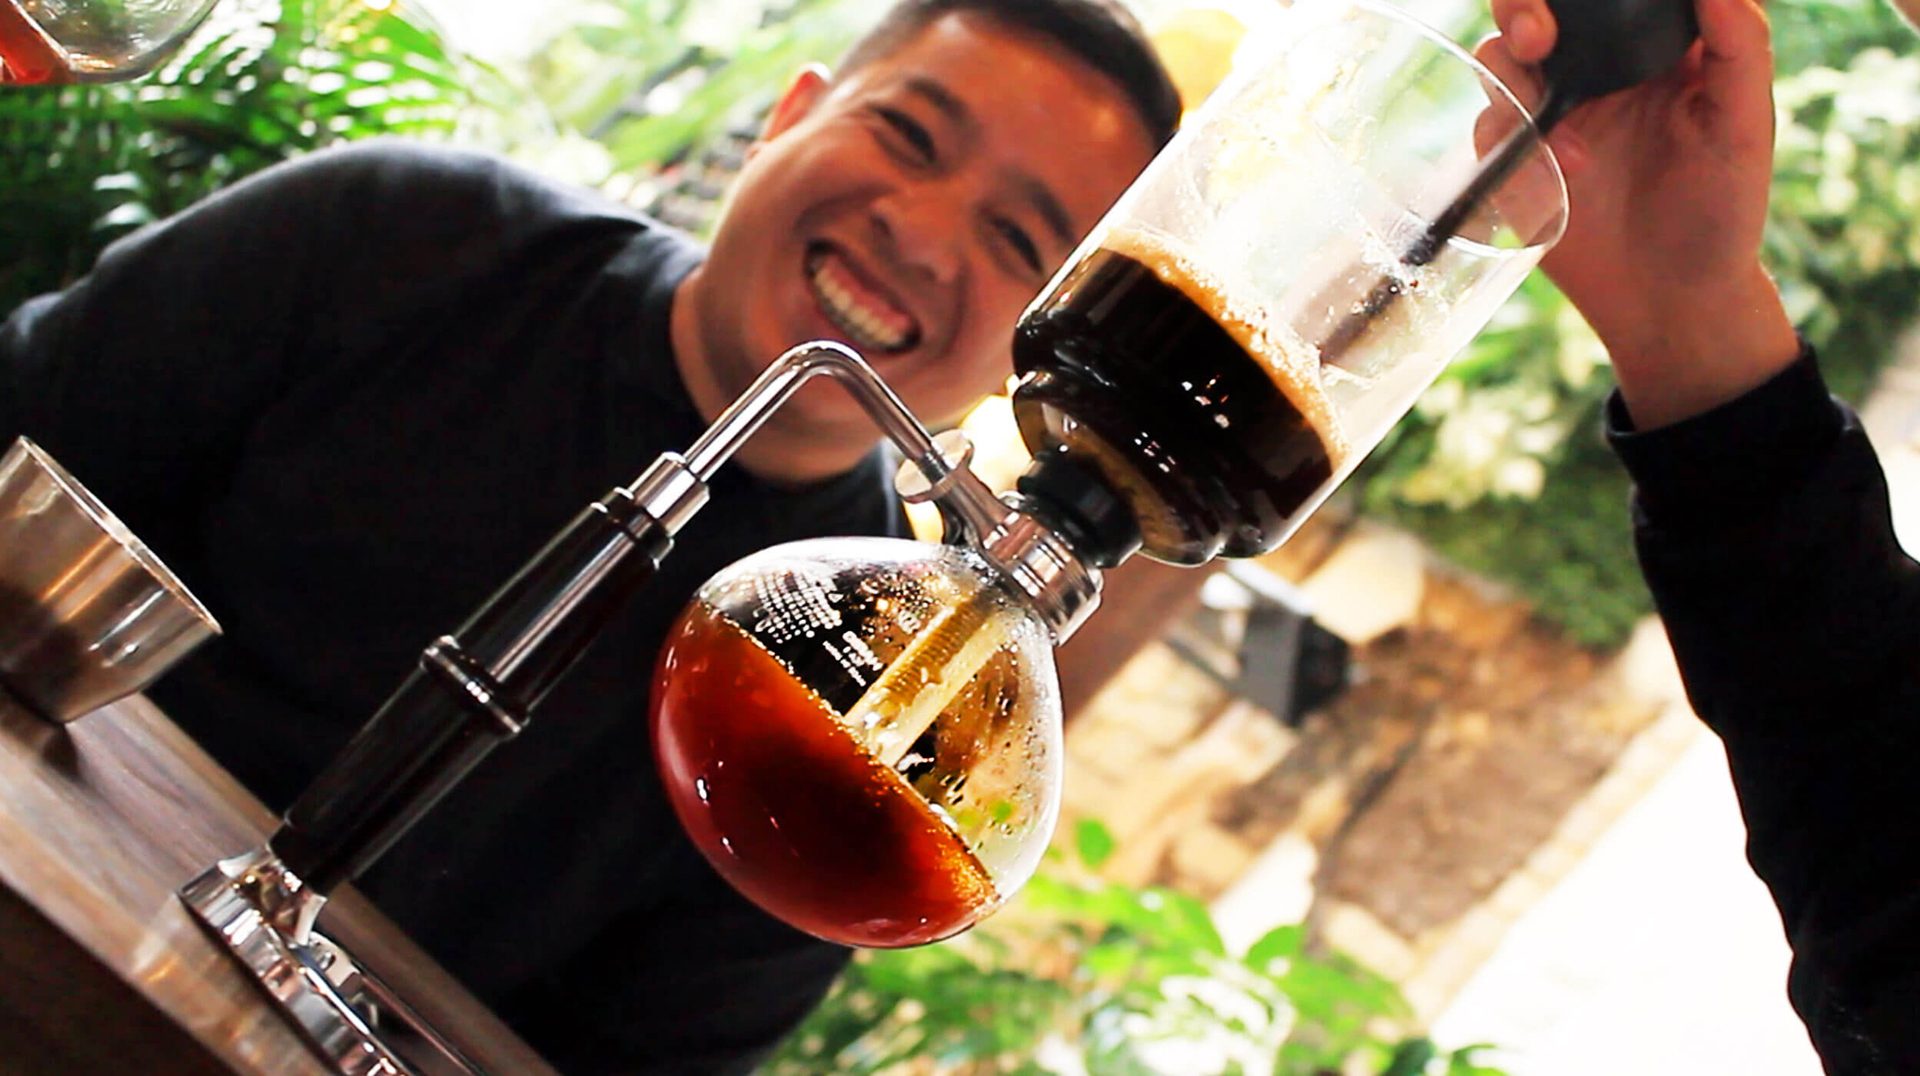 A person smiling while preparing coffee using a siphon coffee maker at a cafe, one of the unique things to do in Bogotá.